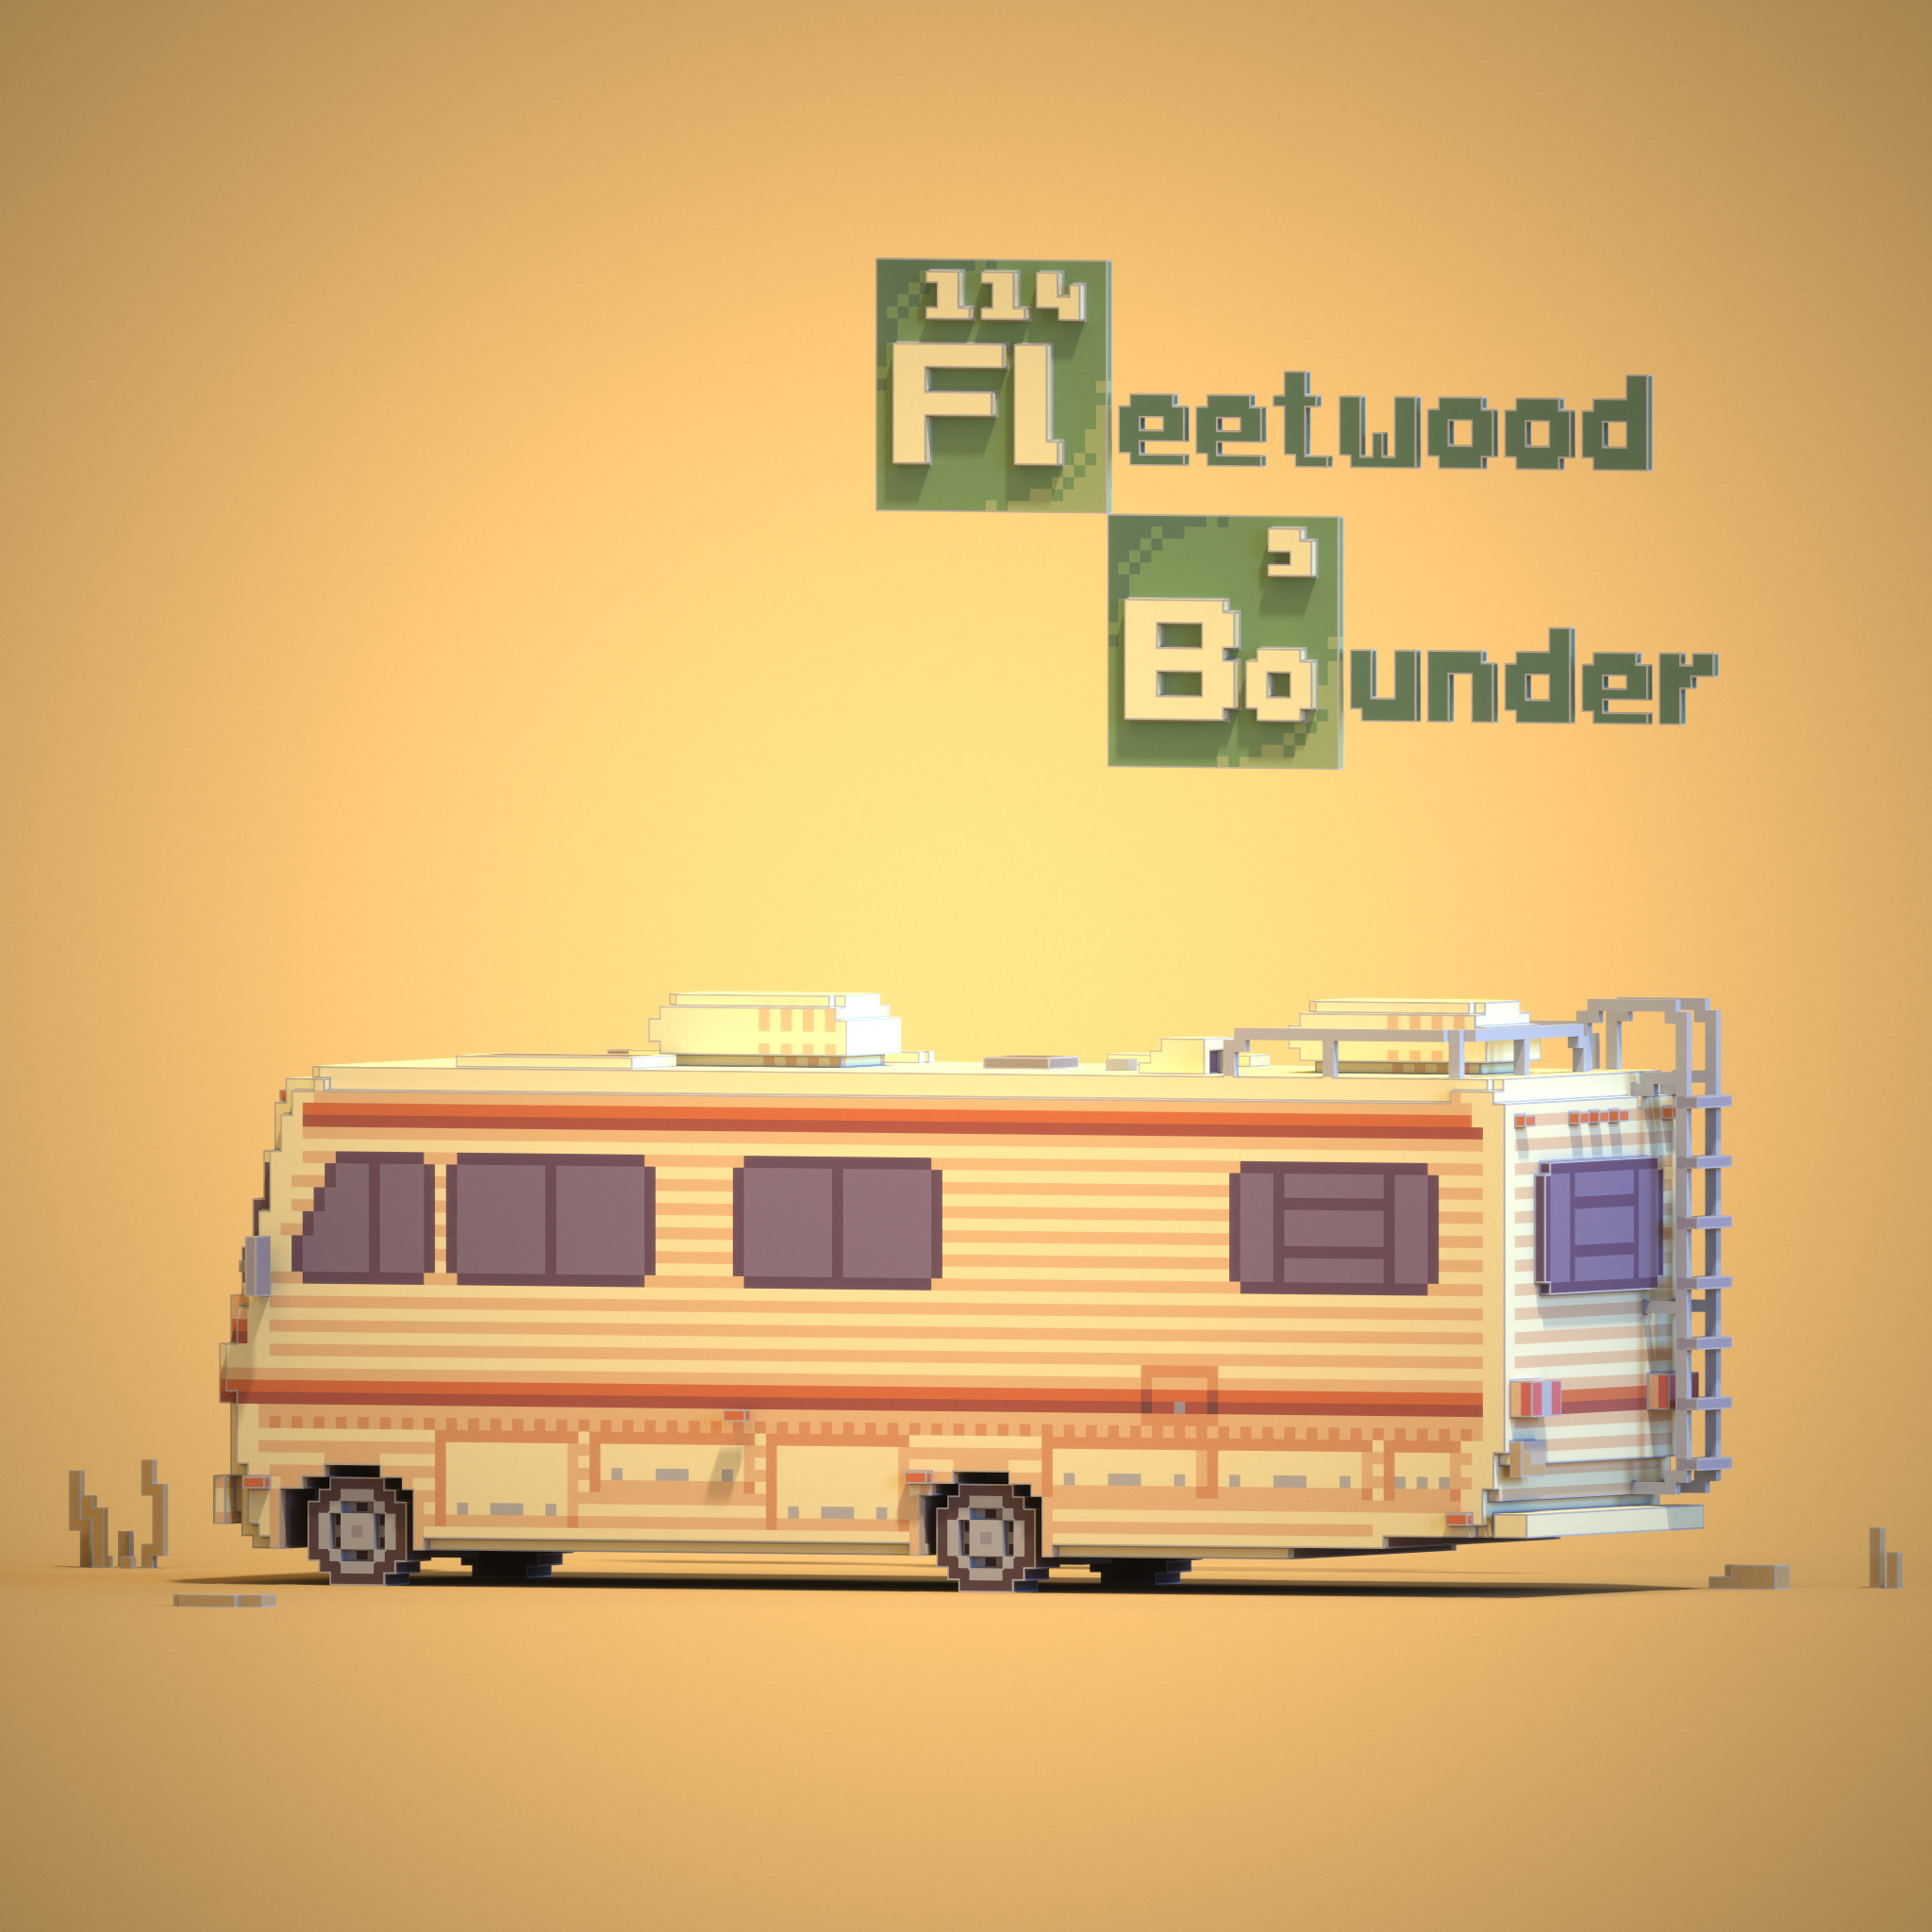 Voxel model rendering of a Fleetwood Bounder created and rendered using Magicavoxel software.